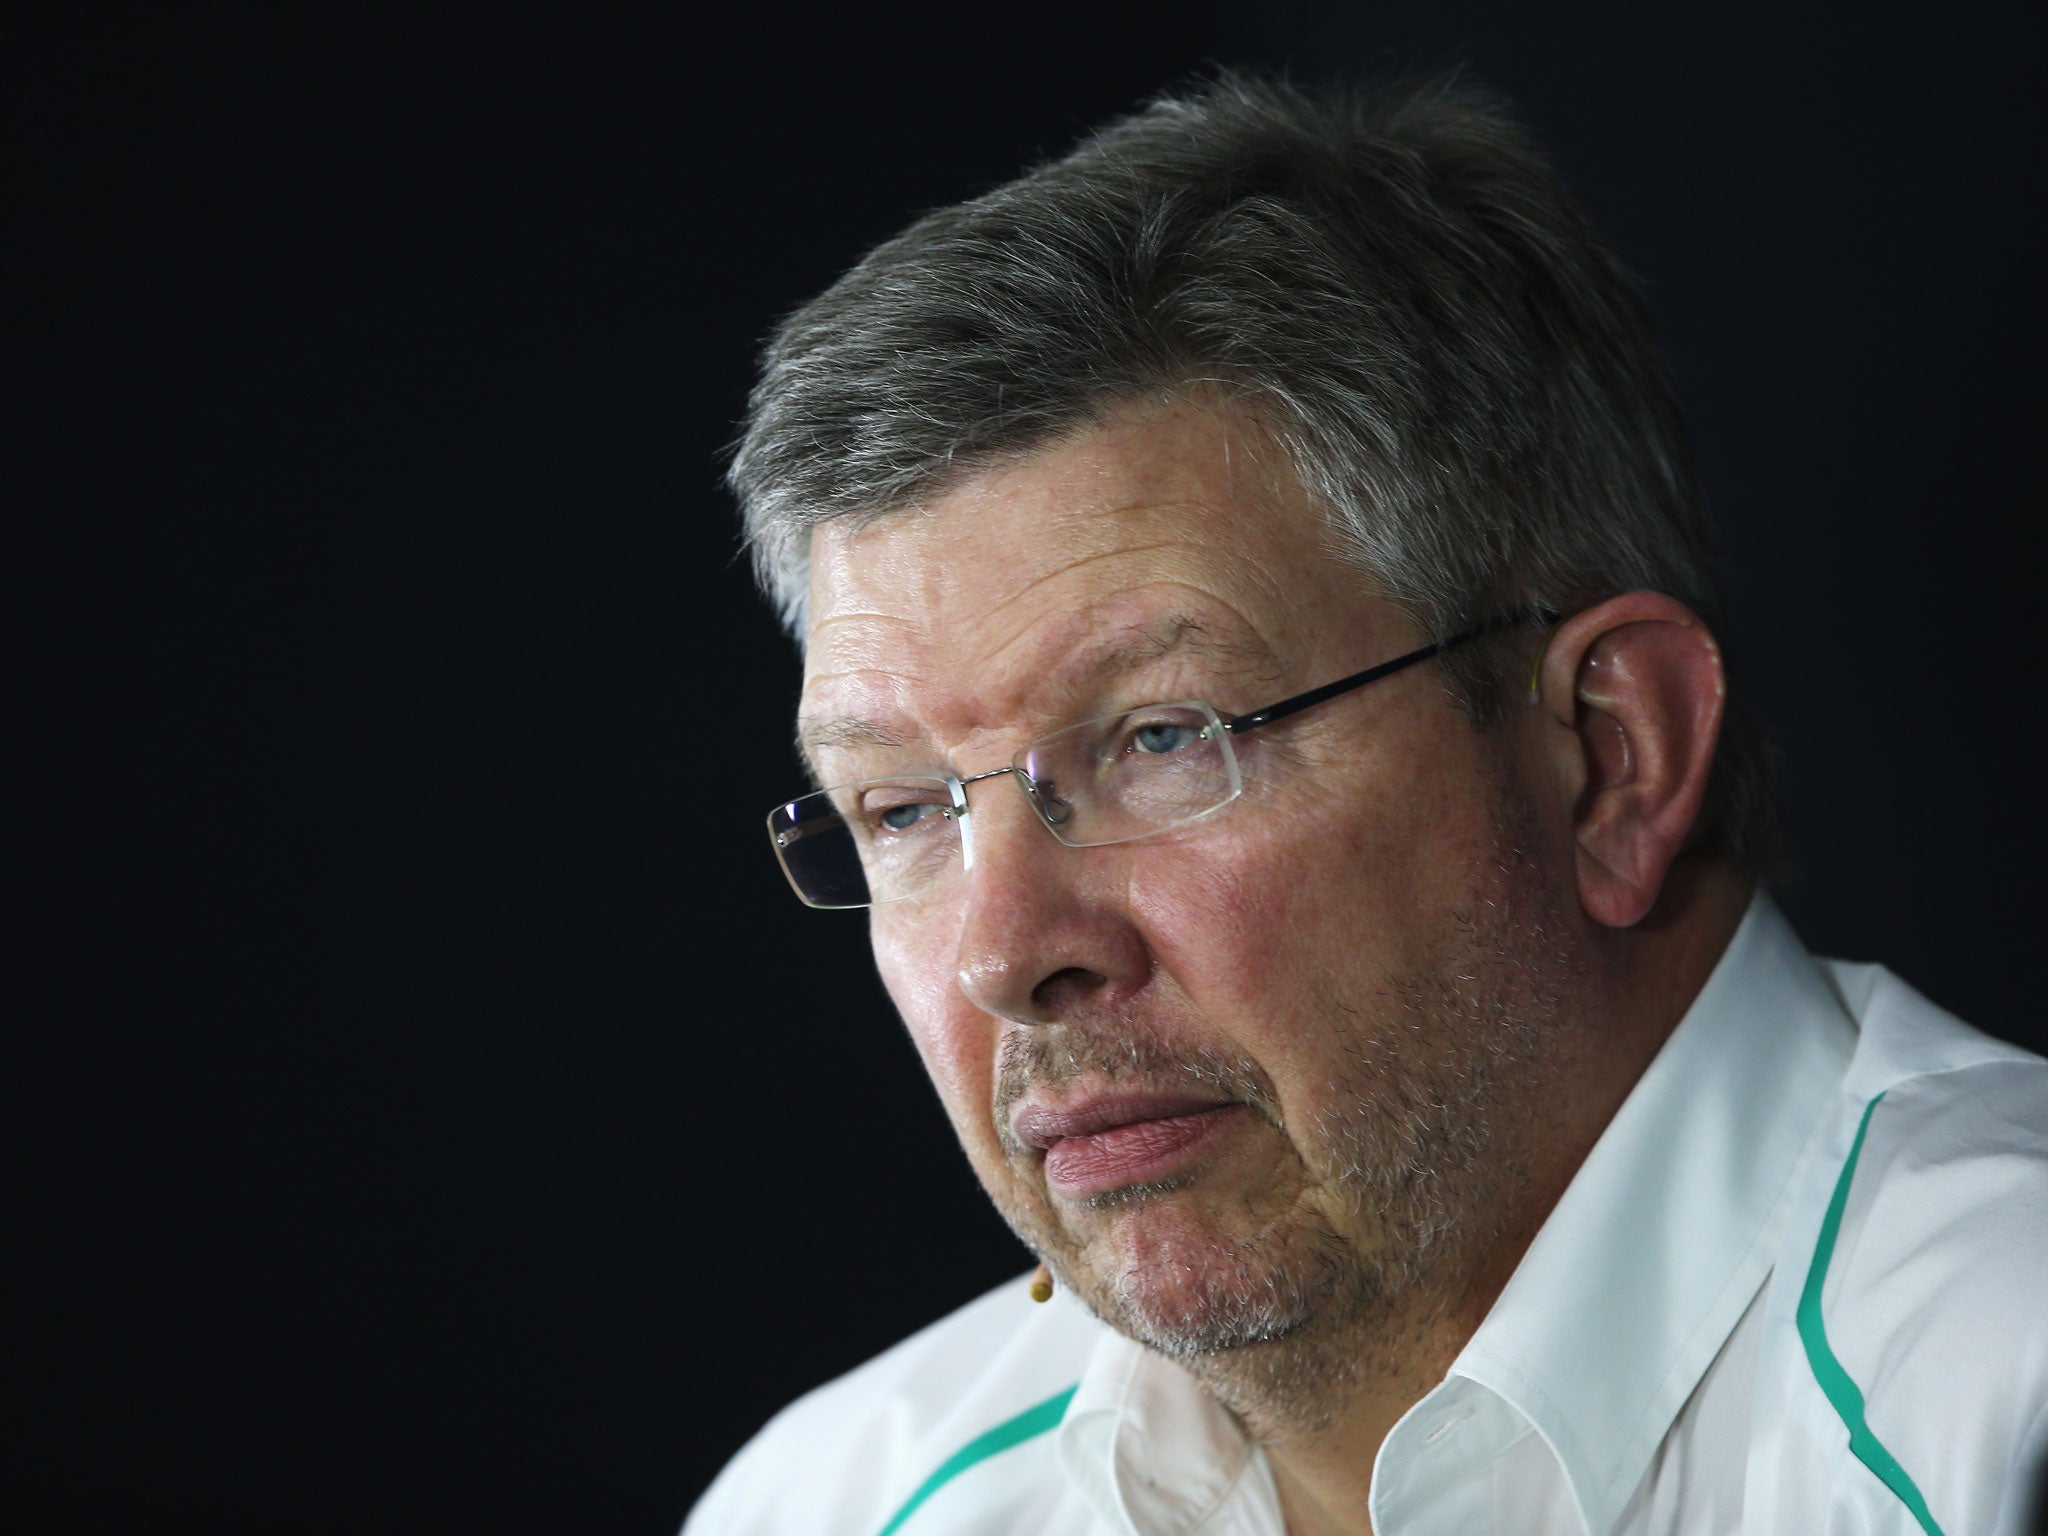 Ross Brawn could return to Formula One should the team principal role become available at McLaren